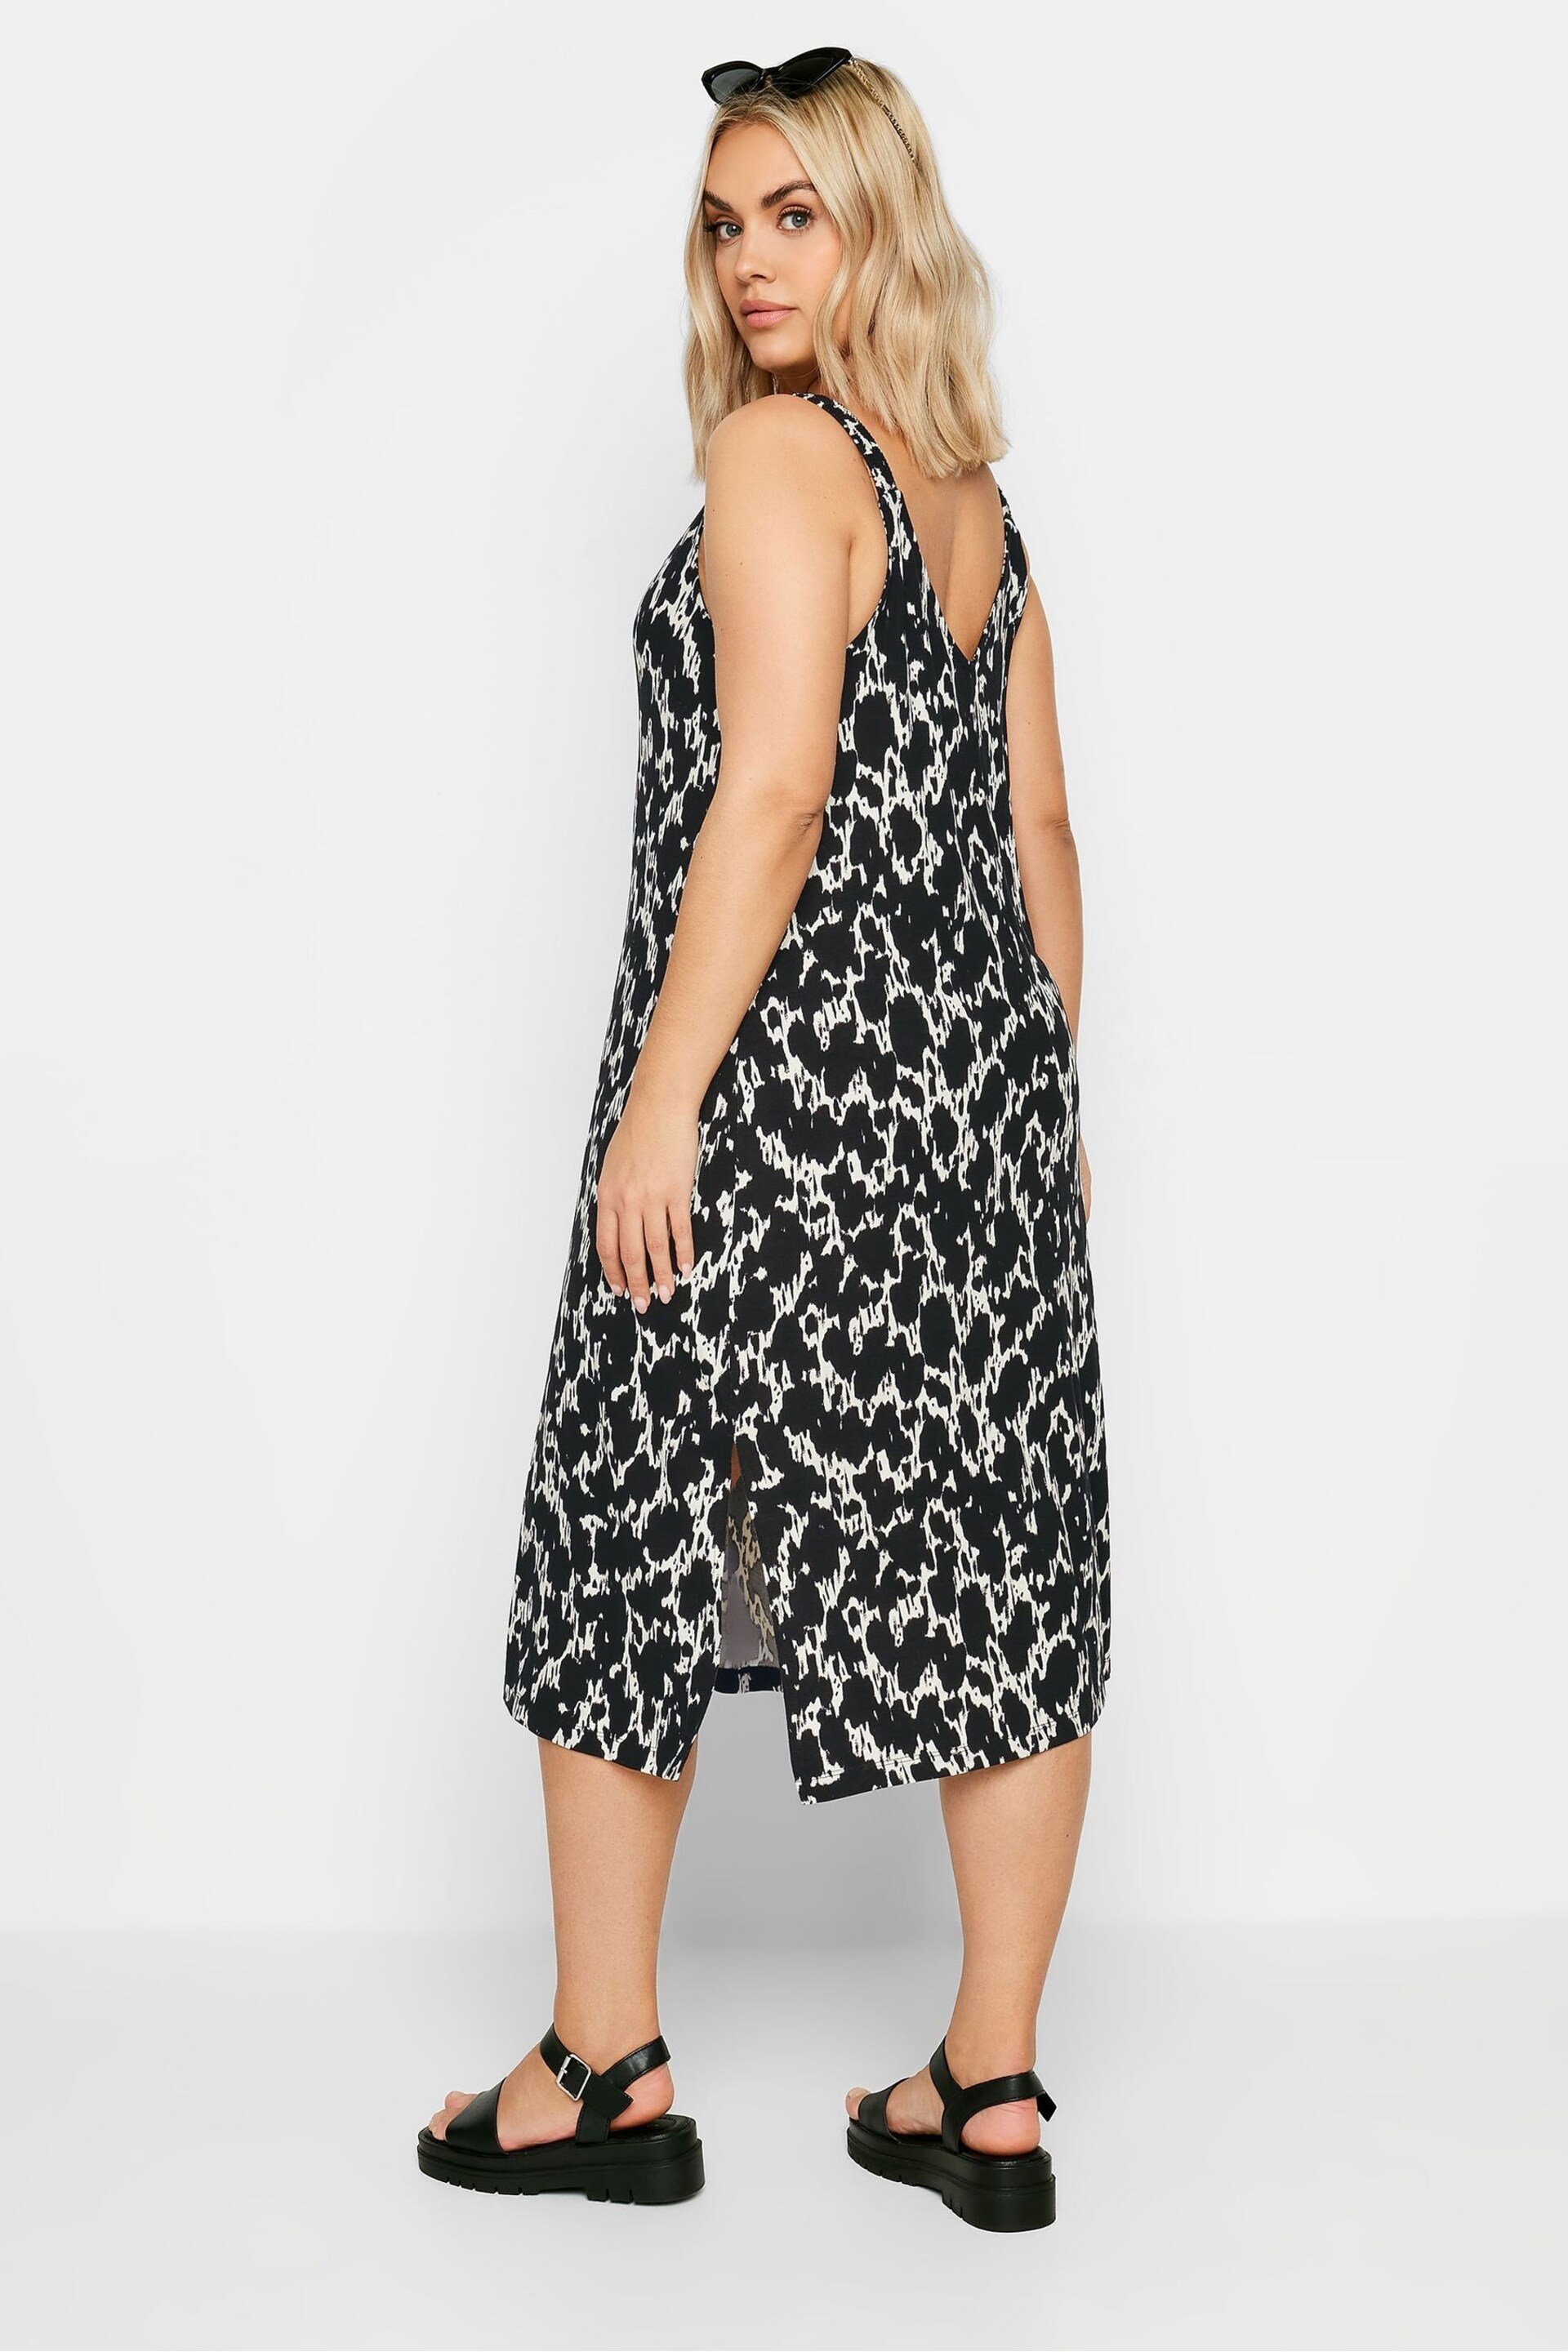 Yours Curve Dark Black Throw On Beach Shirred Strap Dress - Image 3 of 5